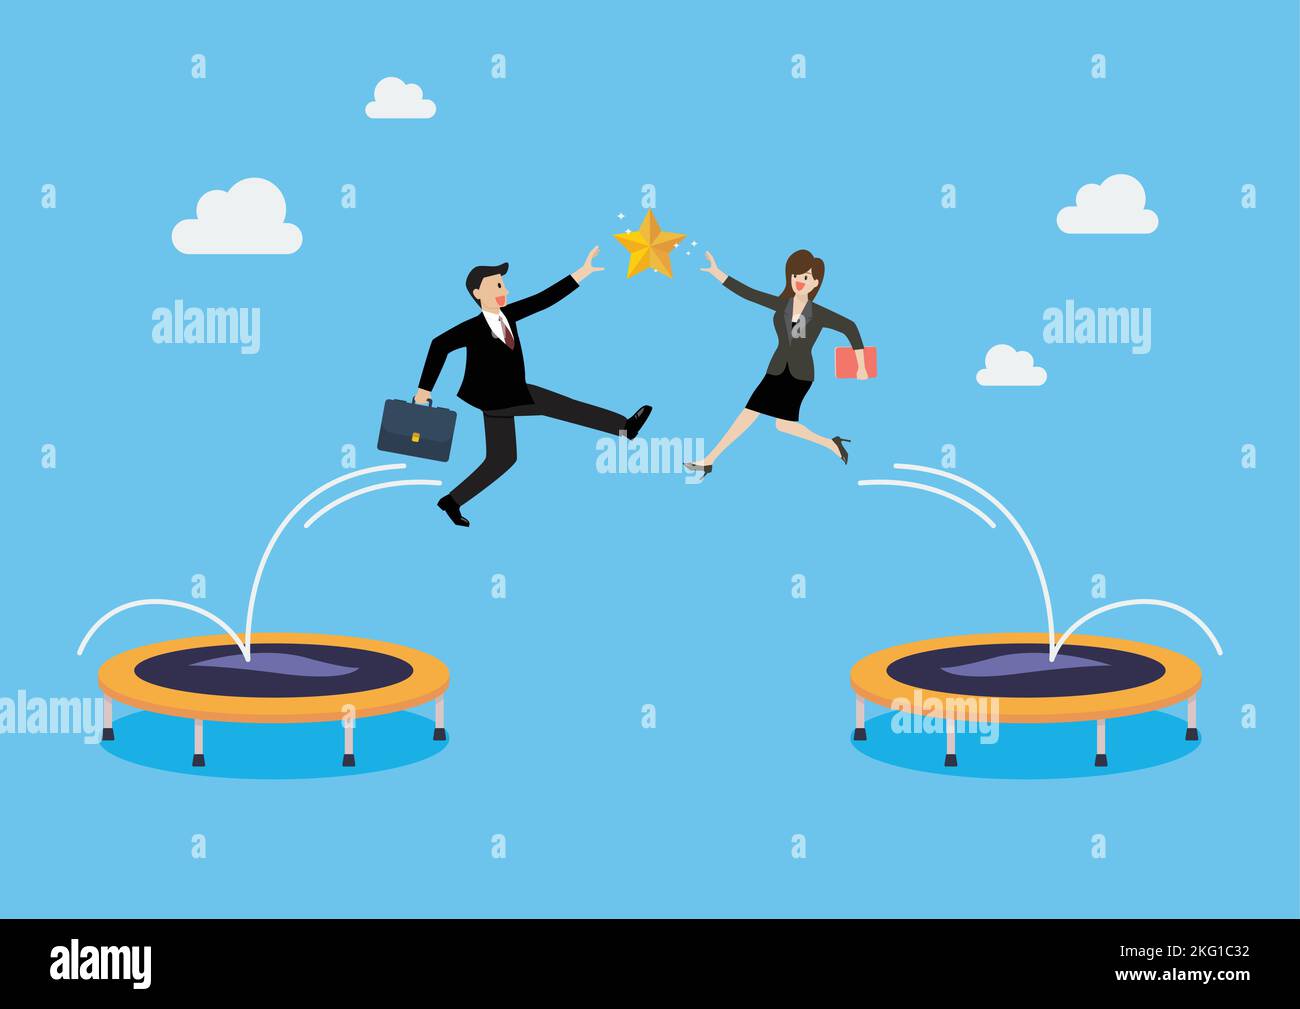 Businessman and woman bounce on trampoline jump flying high to grab star. Business concept. Vector illustration Stock Vector